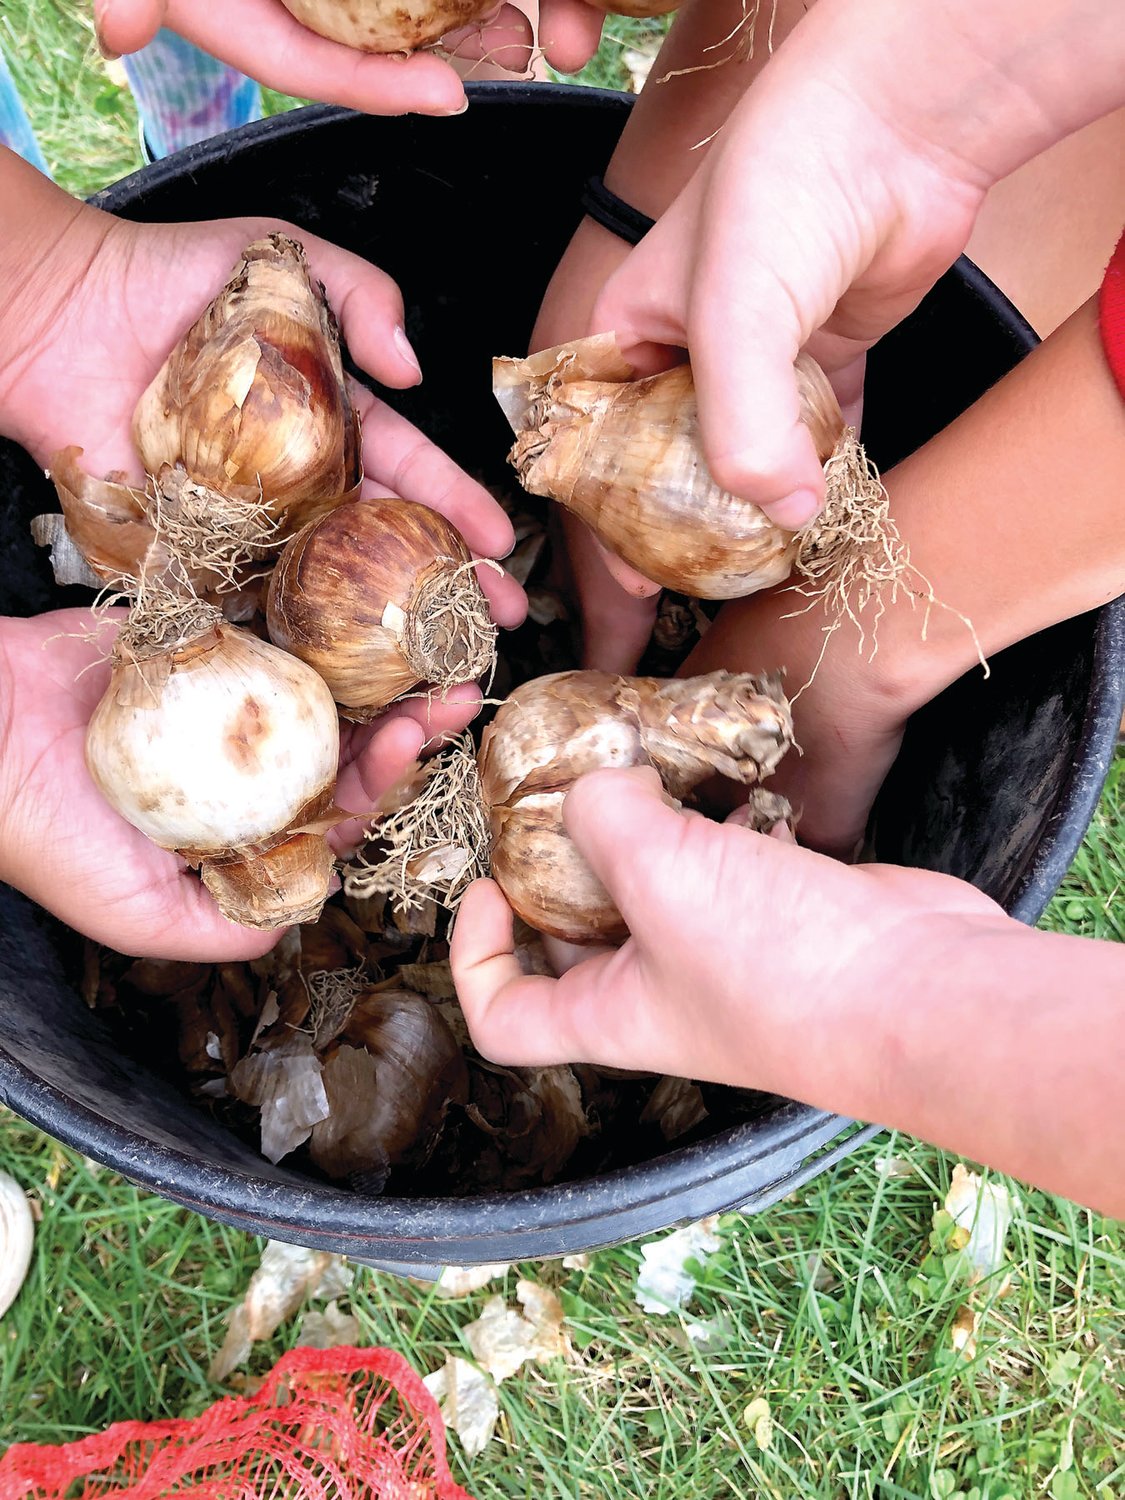 Children grab daffodil bulbs out of a bucket. The bulbs were supplied by Bucks Beautiful, which planted 40,000 bulbs across Bucks County last fall.